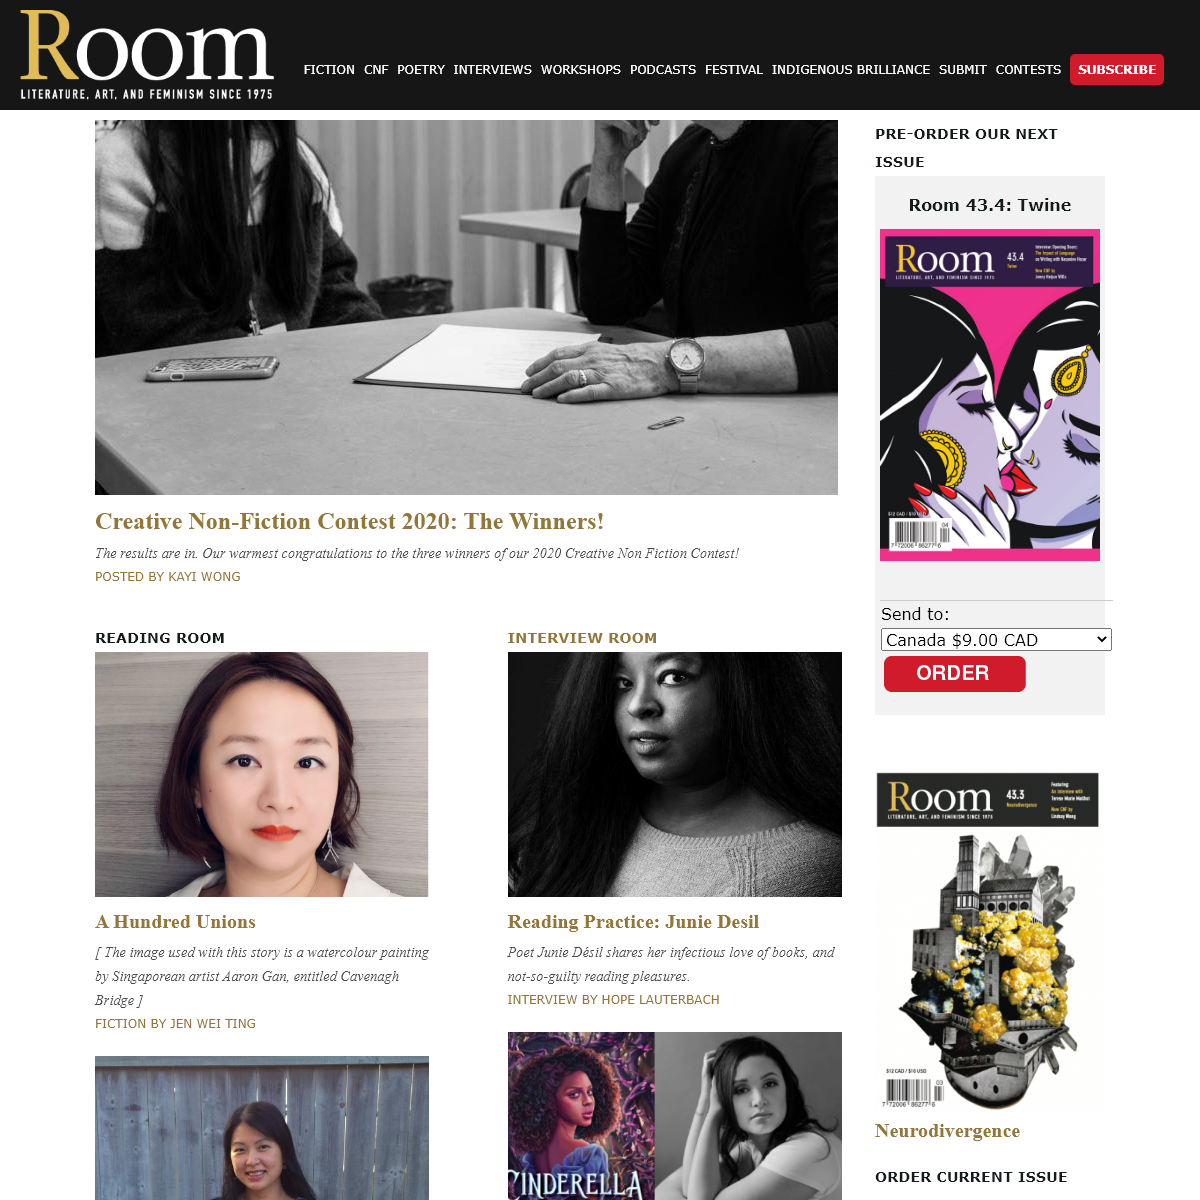 A complete backup of roommagazine.com